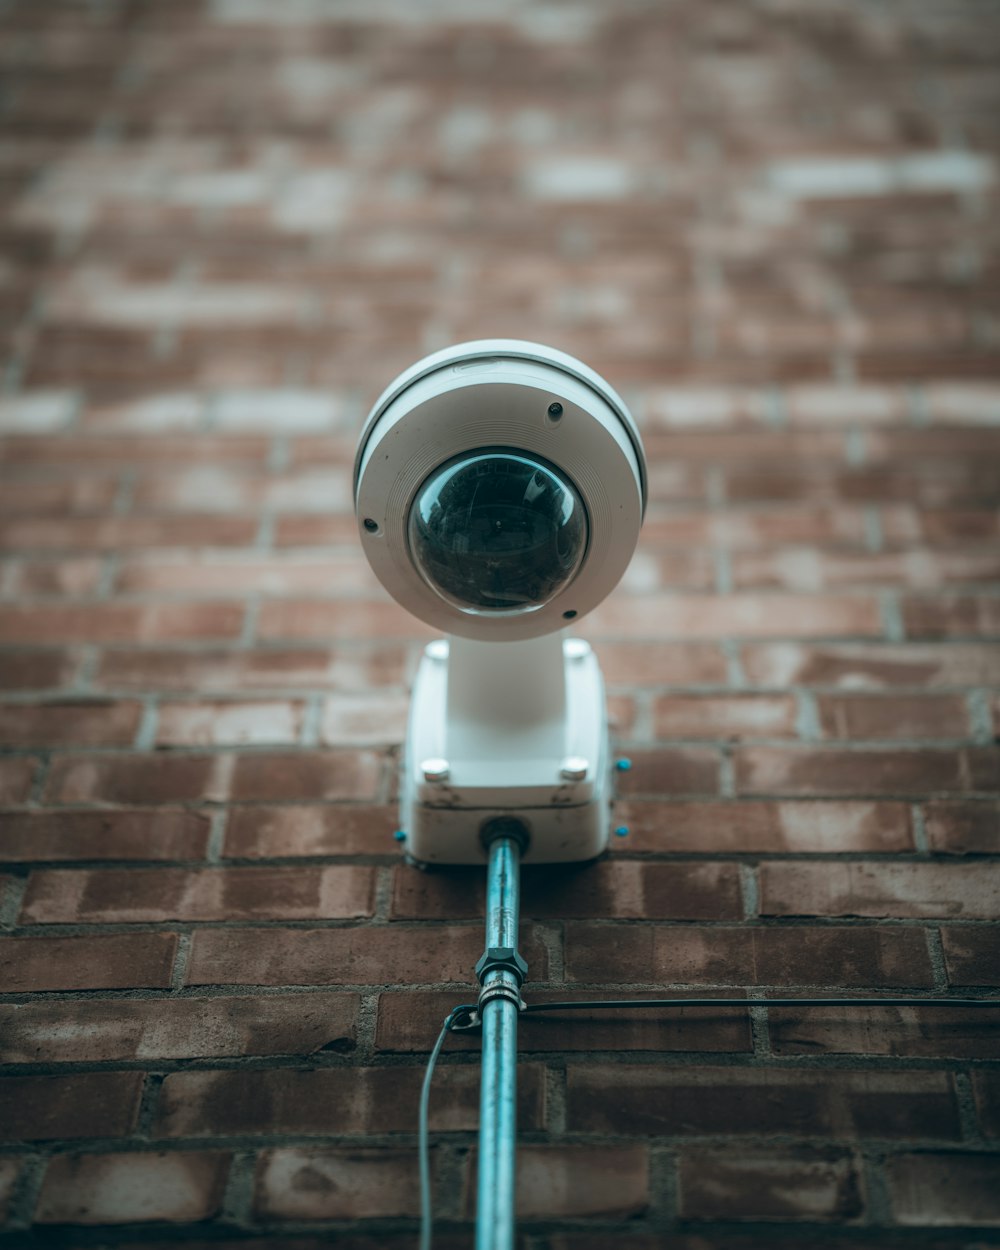 100+ Cctv Camera Pictures [HD] | Download Free Images & Stock Photos on  Unsplash